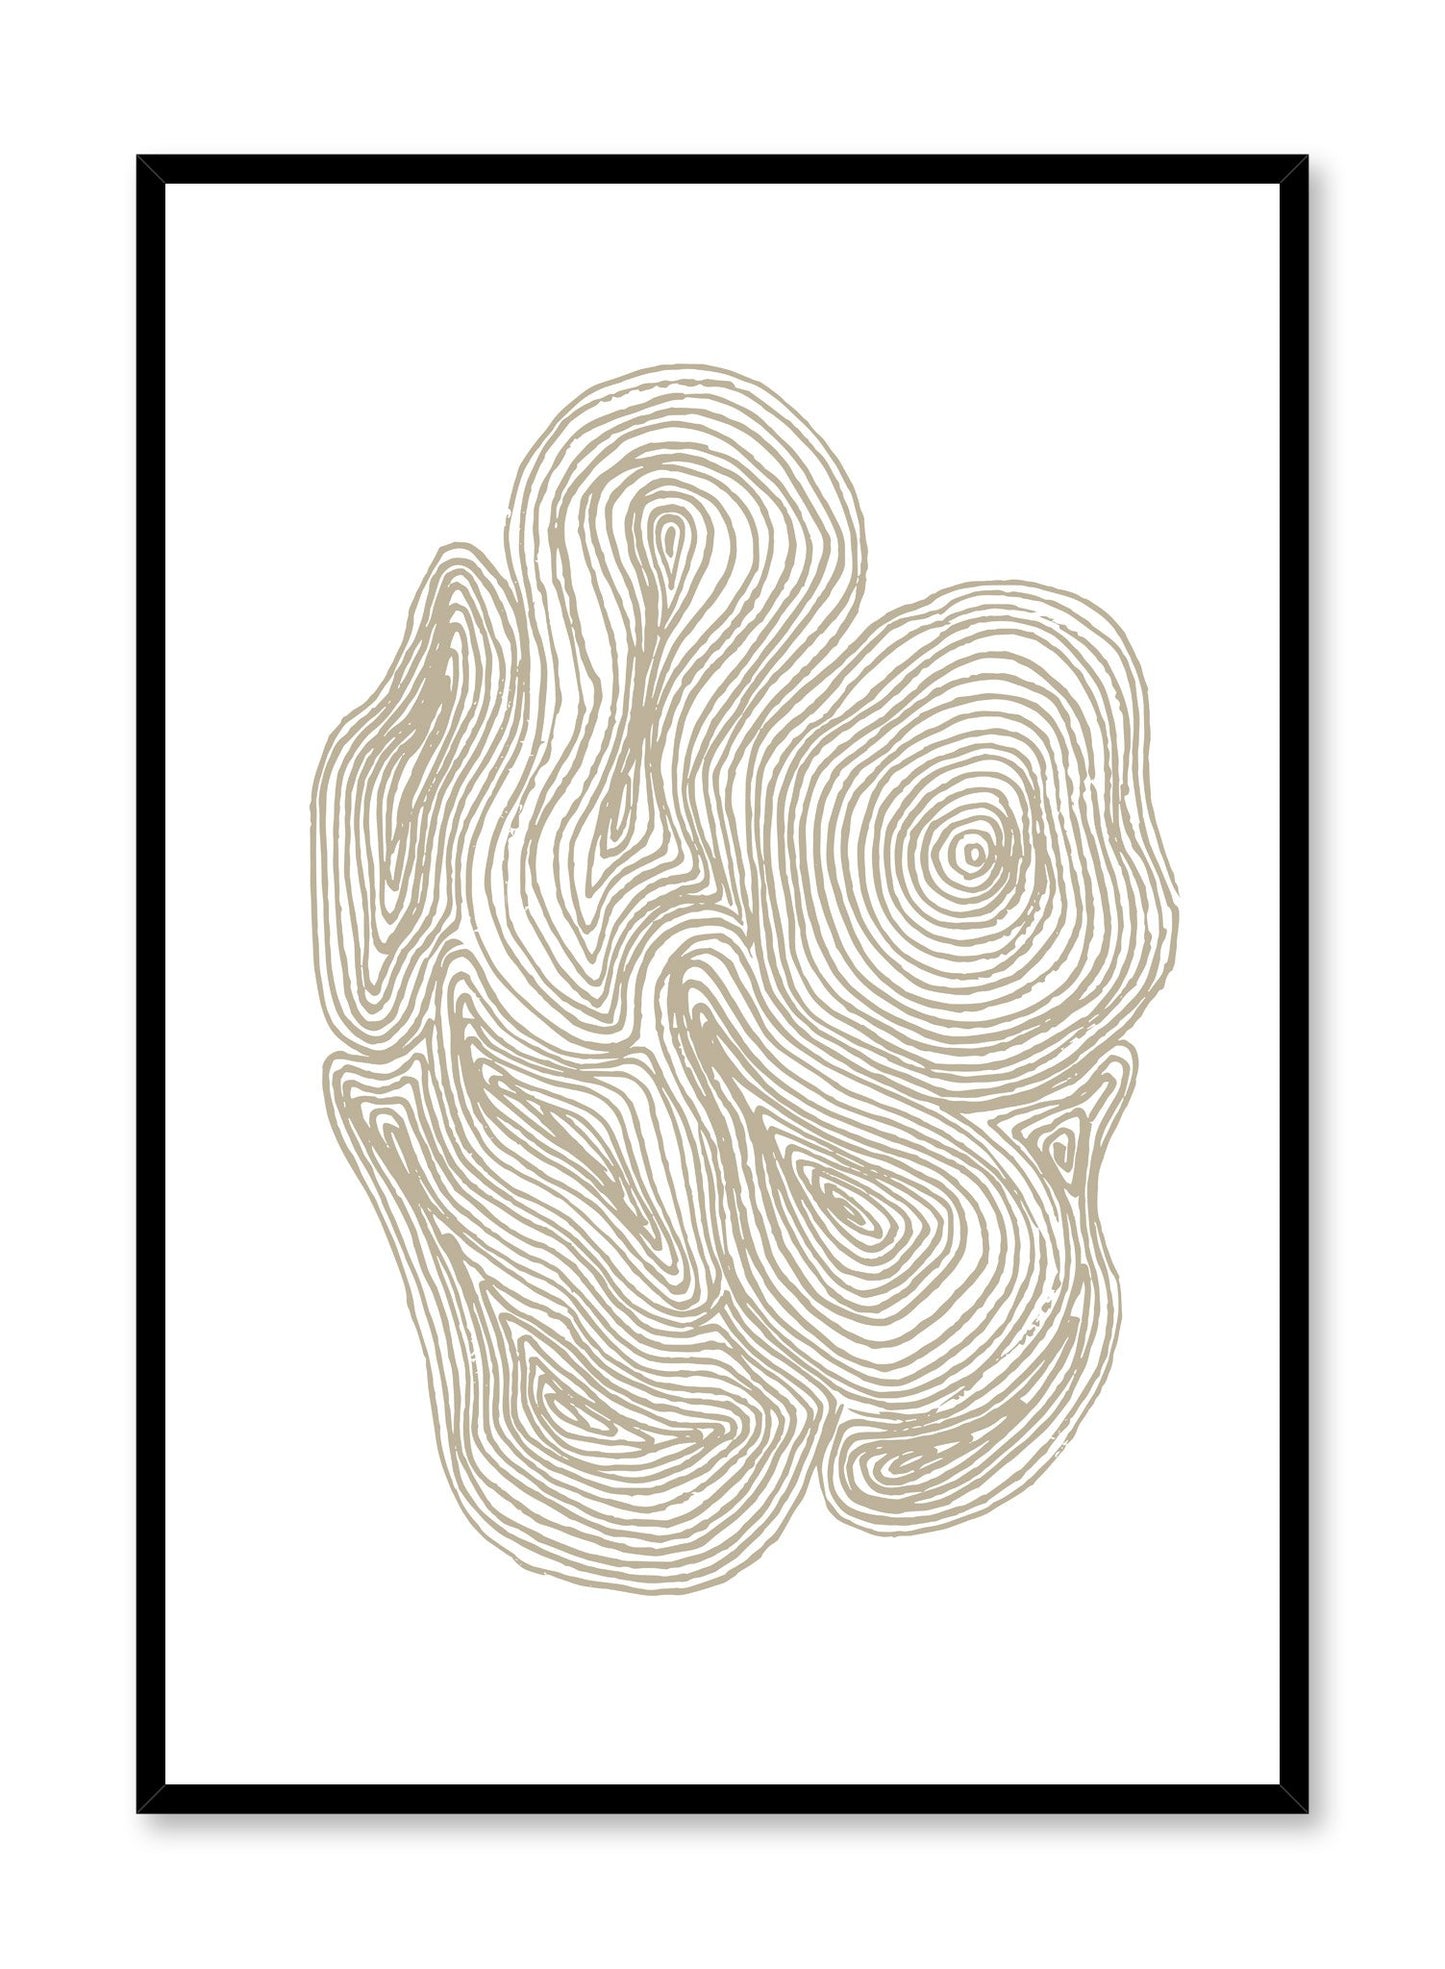 Scandinavian poster by Opposite Wall with hand-made art design with cluster of swirls design